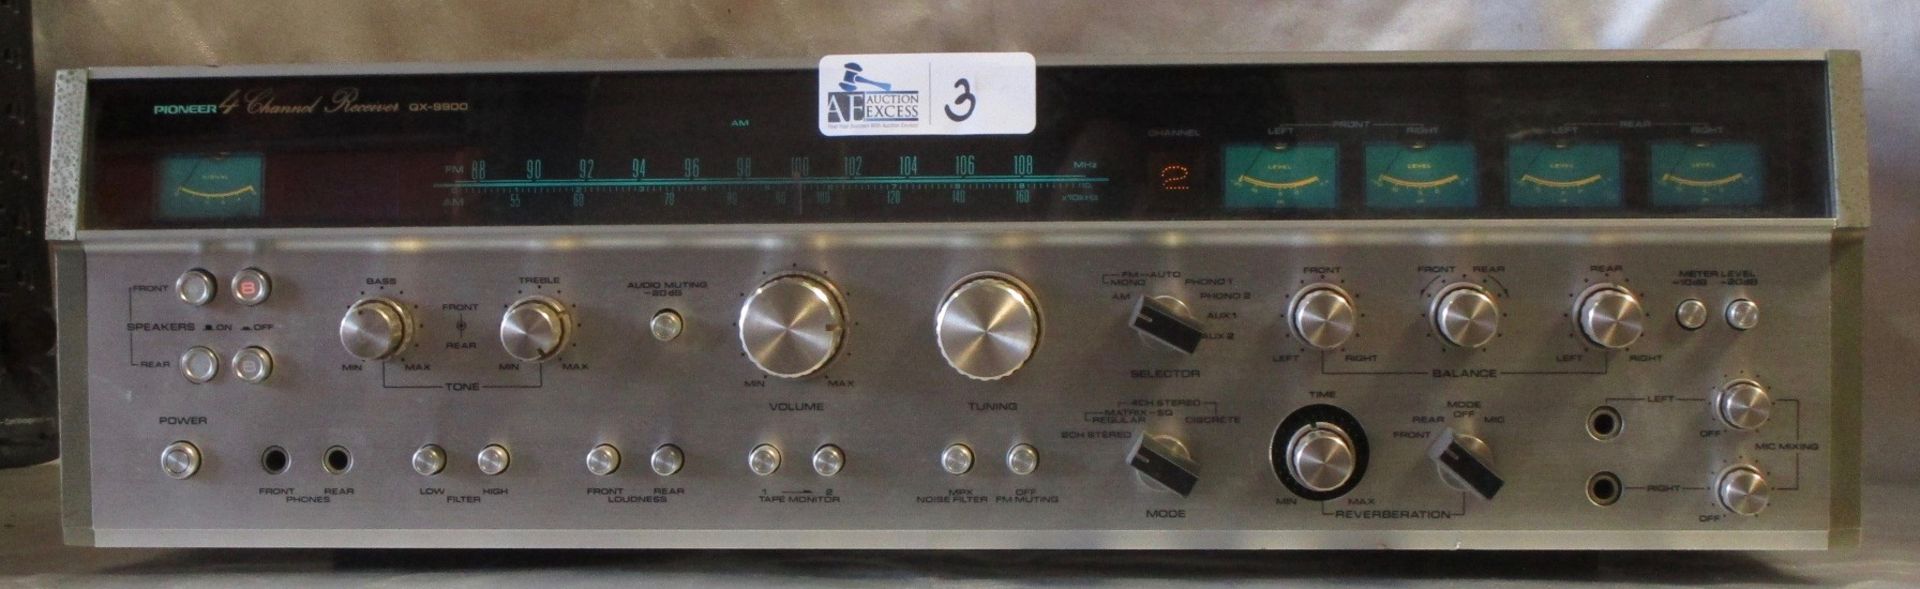 PIONEER 4 CHANNEL RECEIVER QX-9900 - Image 2 of 3